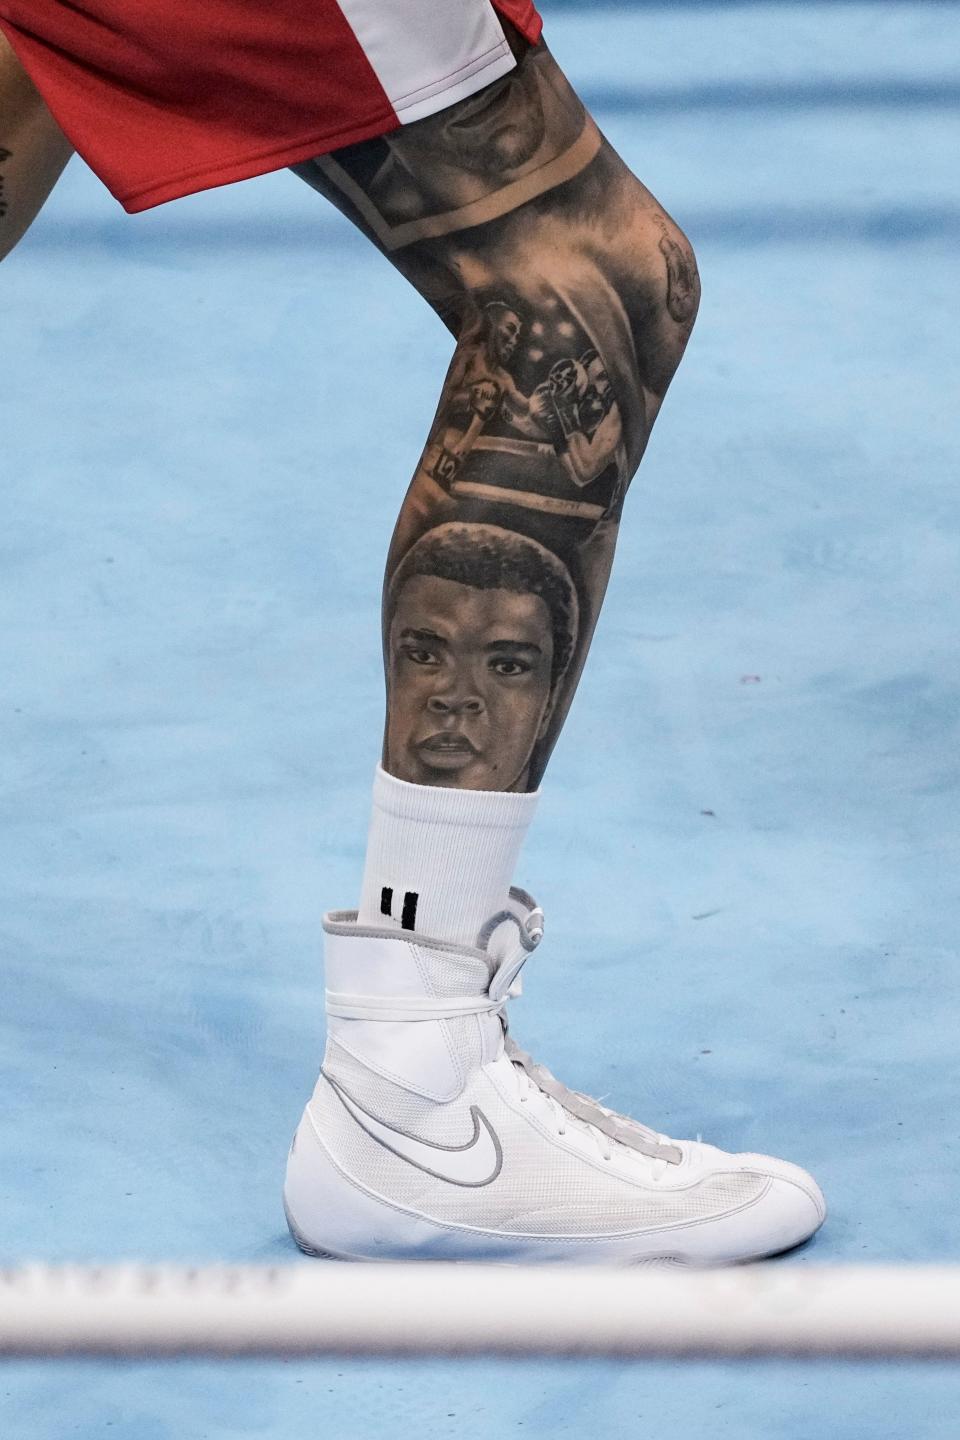 Boxer Harry Garside (AUS) displays a tattoo of Muhammad Ali on his leg during the Tokyo 2020 Olympic Summer Games at Kokugikan Arena on July 31, 2021. 